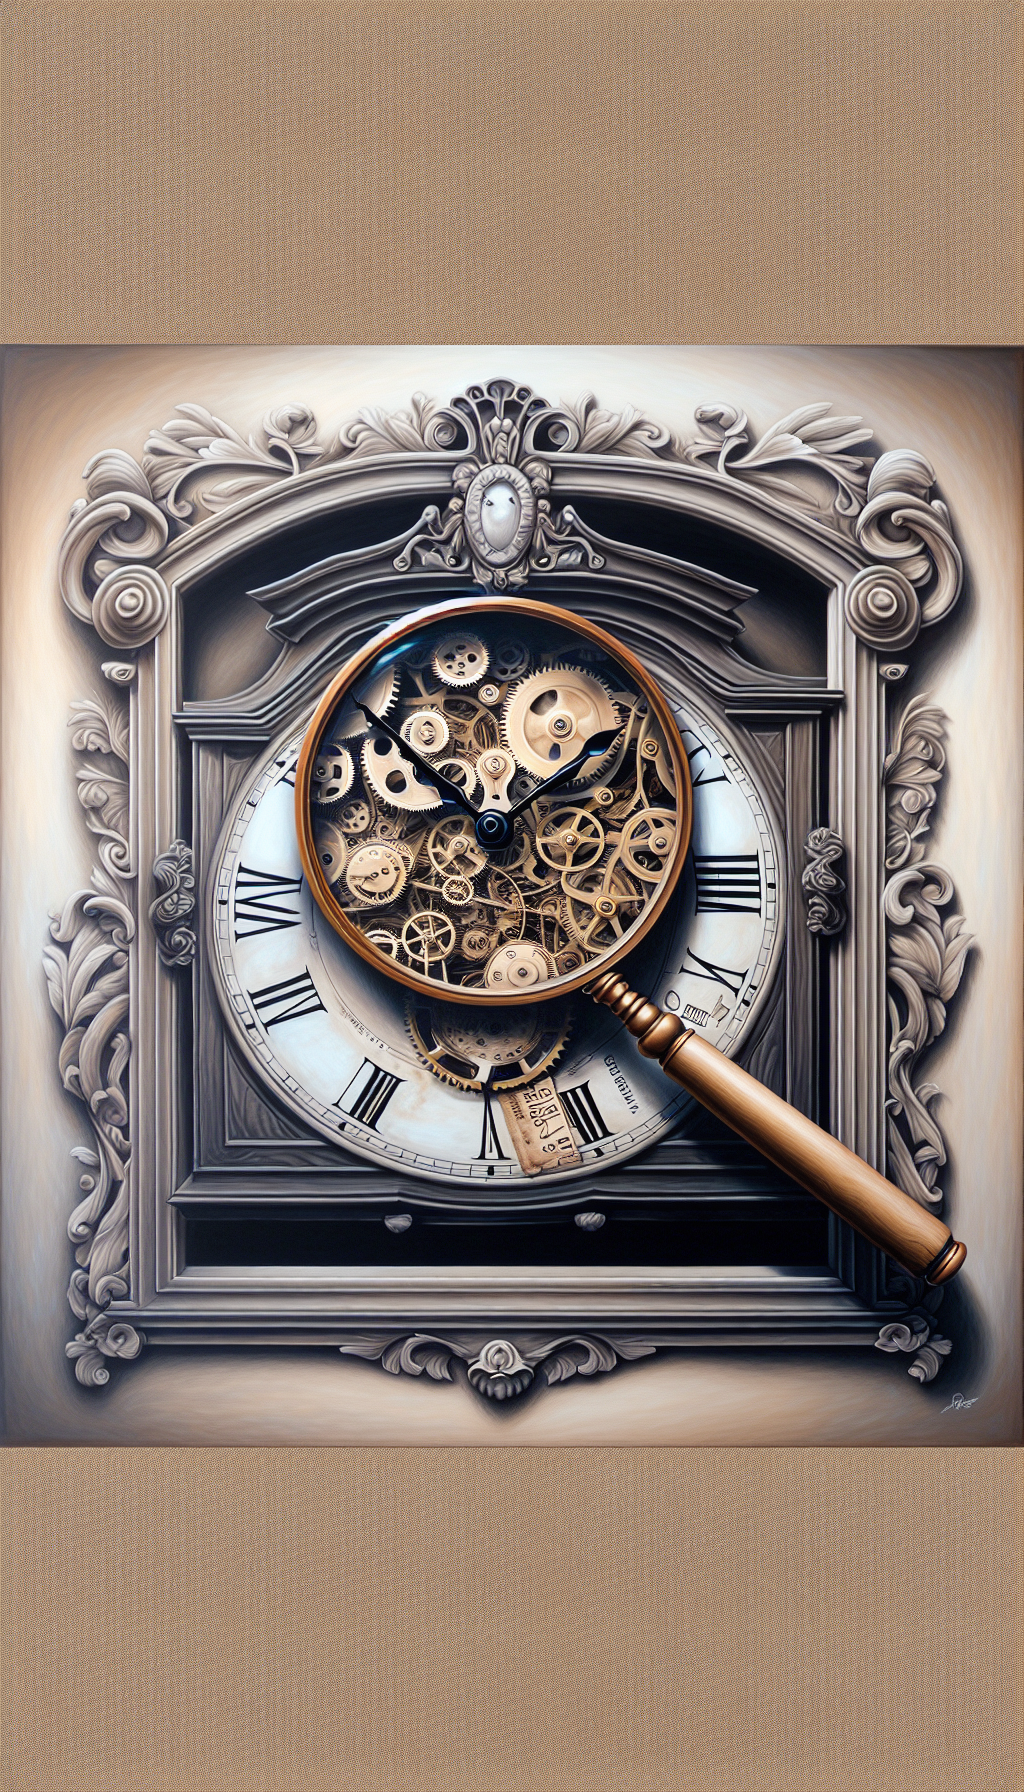 An illustration depicts a magnifying glass hovering over a vintage mantel clock, with its inner gears visible and sparkling as if unveiling hidden gems. Behind it, a faded price tag morphs into a clock’s pendulum, swinging to denote fluctuating values. The clock's facade sports a watermark of a certificate, symbolizing authenticity assessment, all framed within an antique-style ornate border.